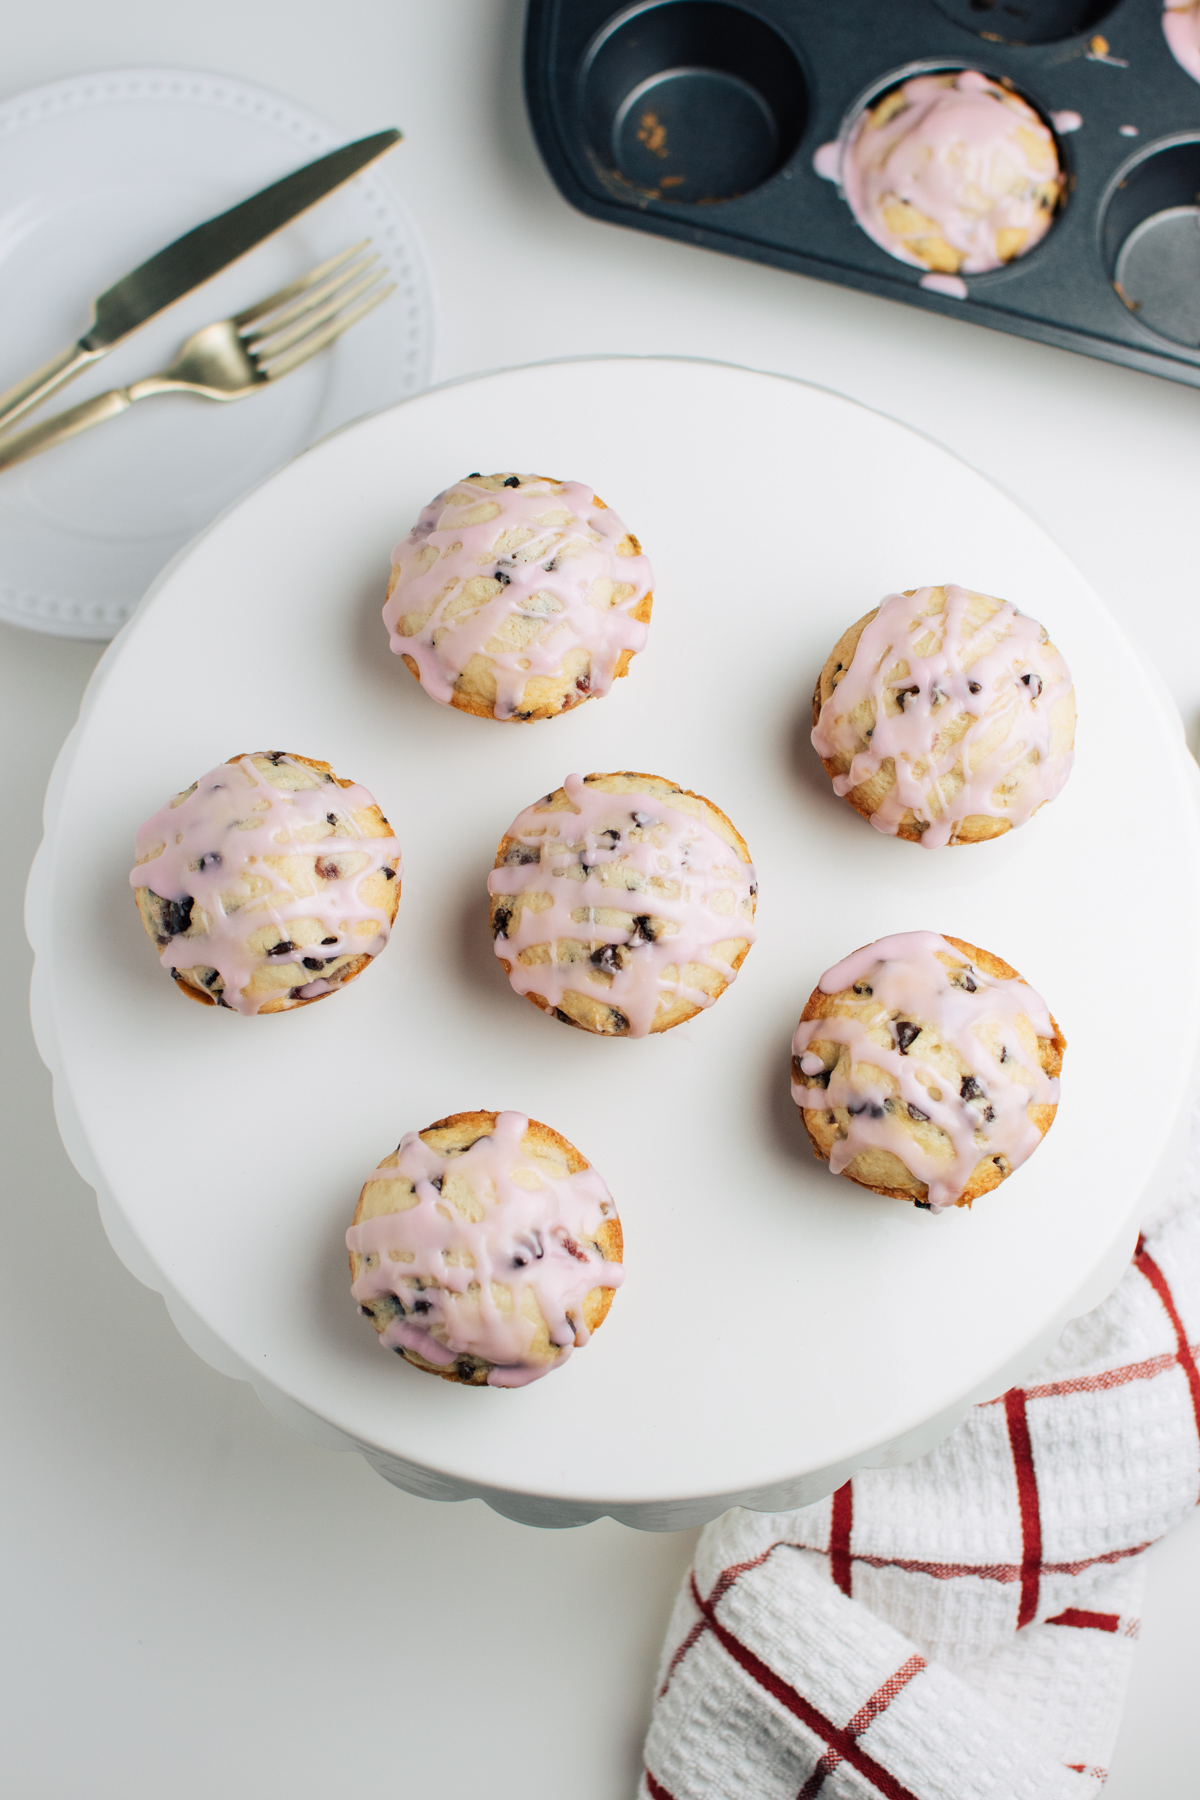 Cherry muffins with pink glaze on large white cake stand next to muffin tin.